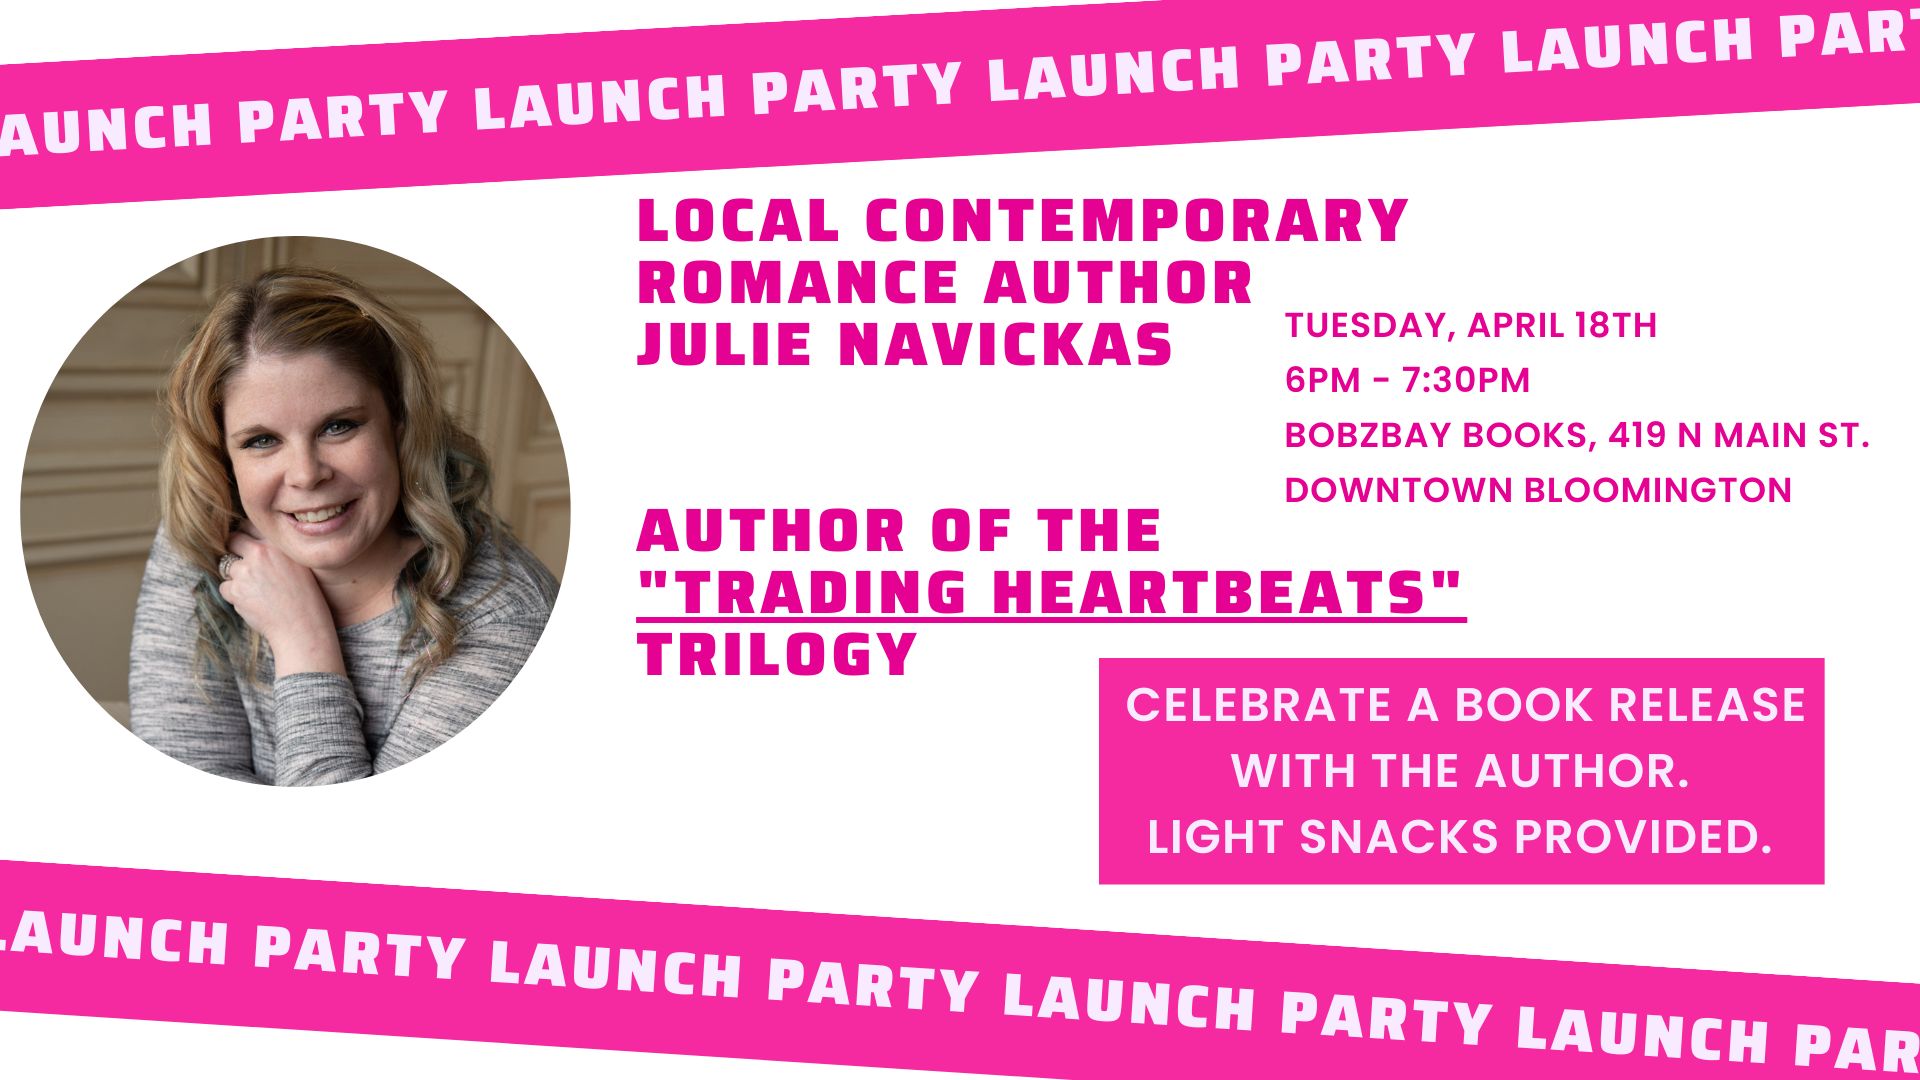 Book Launch Party! Local Contemporary Romance Author Julie Navickas at Bobzbay Books